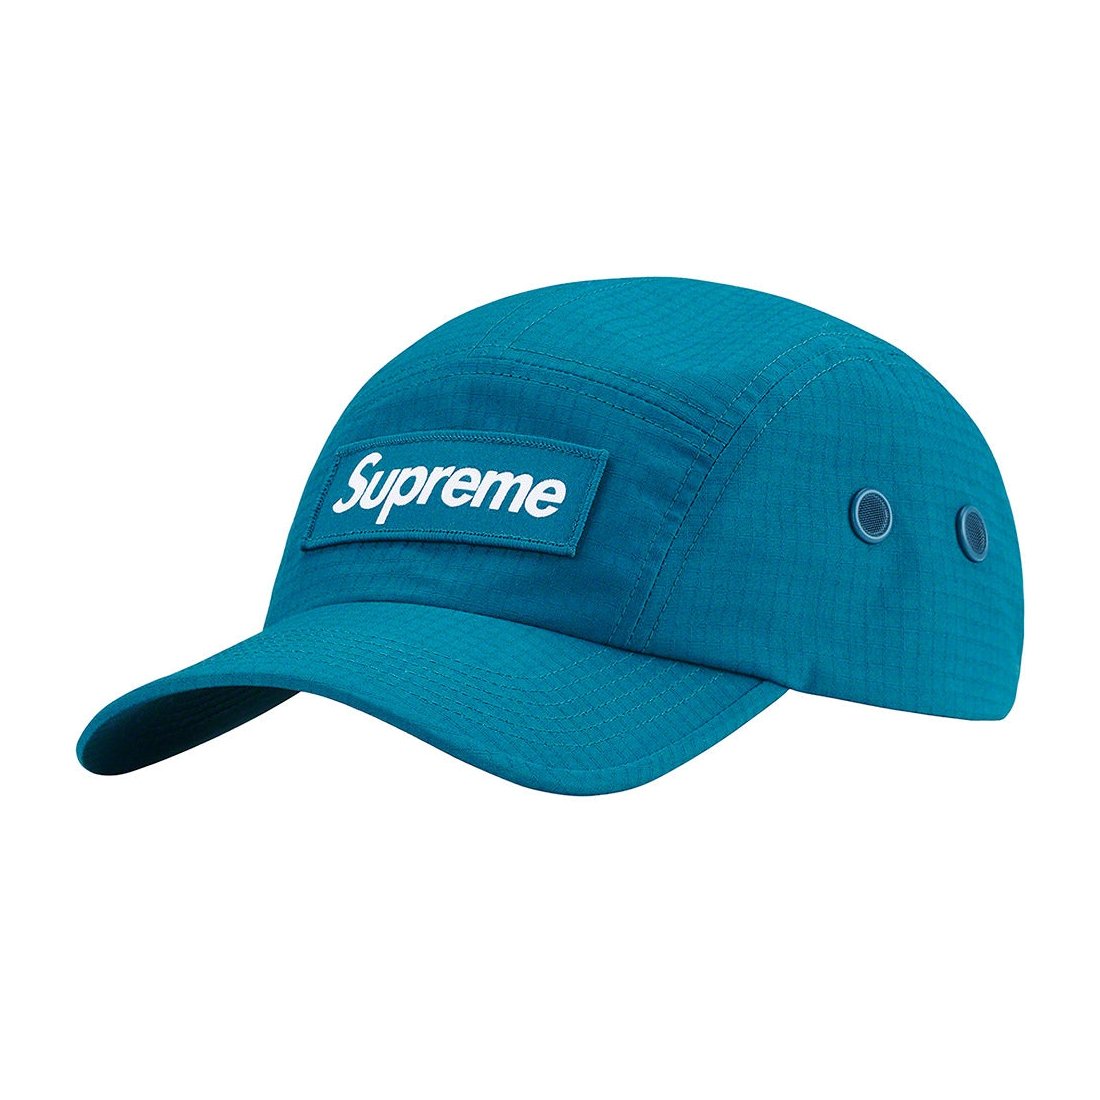 Details on Ventile Camp Cap Teal from spring summer 2023 (Price is $54)